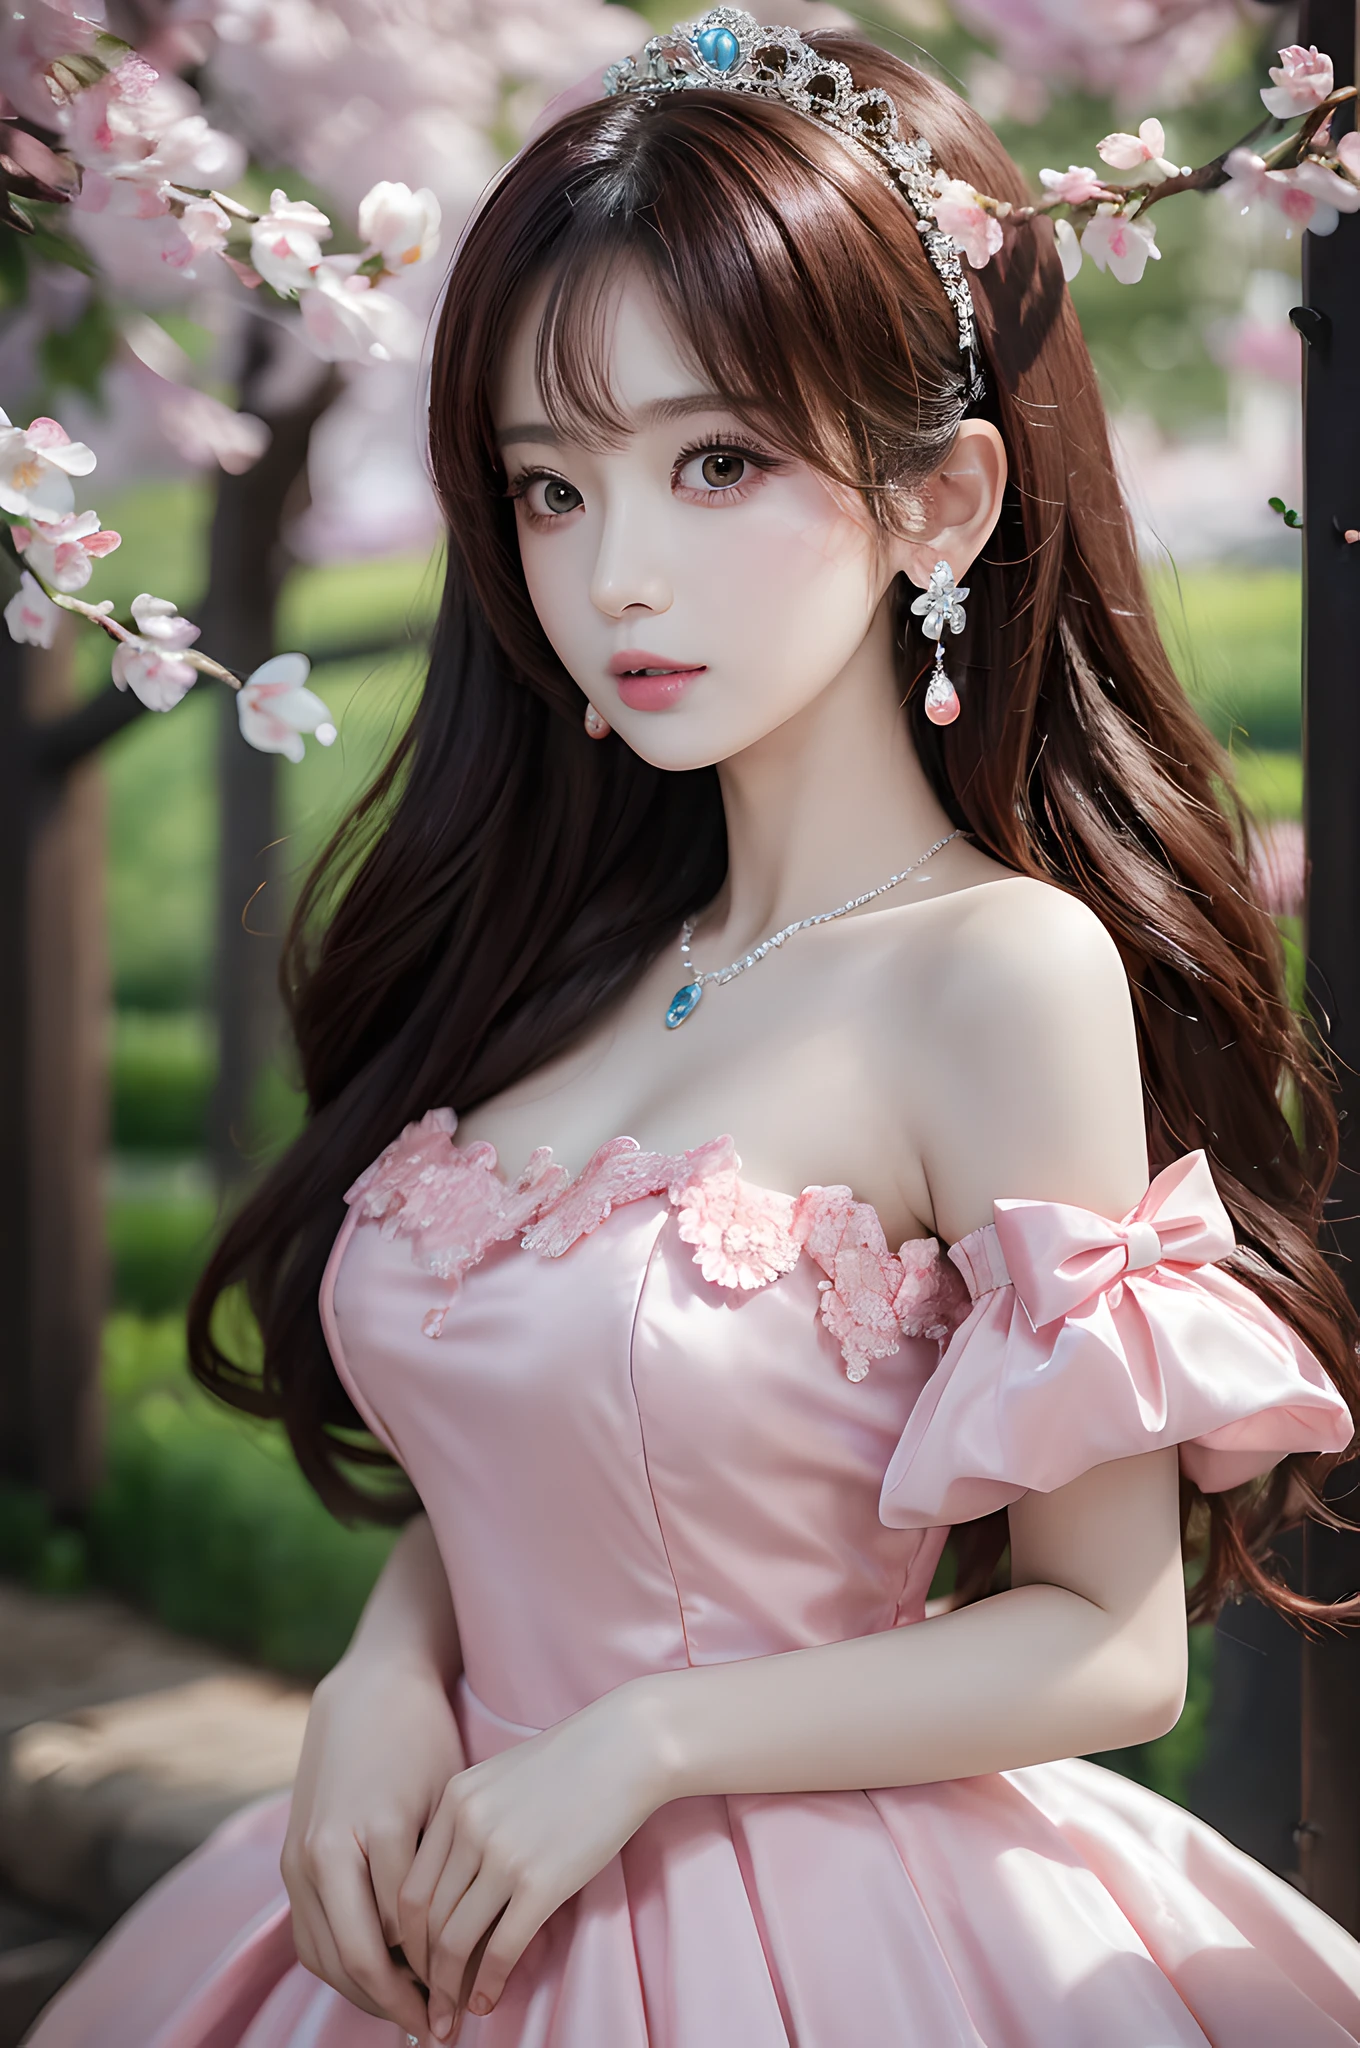 ((Realistic lighting, top quality, 8K, Masterpiece: 1.3)), Clear Focus: 1.2, 1Woman, Perfect Beauty: 1.4, Yushuxin, 1Girl, Dress, Solo, Brunette, Jewelry, Long Hair, Earrings, Bow, Pink Dress, Wood, Nature, Outdoor, Bare Shoulder, Airless Gainsboro, Long Dress, Hair Bow, Forest, Pink Bow,Strapless, Standing, Necklace, Head Tilt, Chapped Lips, Wavy Hair, Strapless Dress,Lace Sleeves, cetin dress,Close-up of woman in pink dress posing for photo, beautiful maiden, anime girl cosplay, beautiful korean woman, beautiful princess, cute elegant pose, belle delphine, wearing pink dress, beautiful fantasy maiden, anime princess, beautiful seductive anime woman,beautiful asian girl, attractive anime girl, elegant glamorous cosplay,take a front,in cherry blossom park,